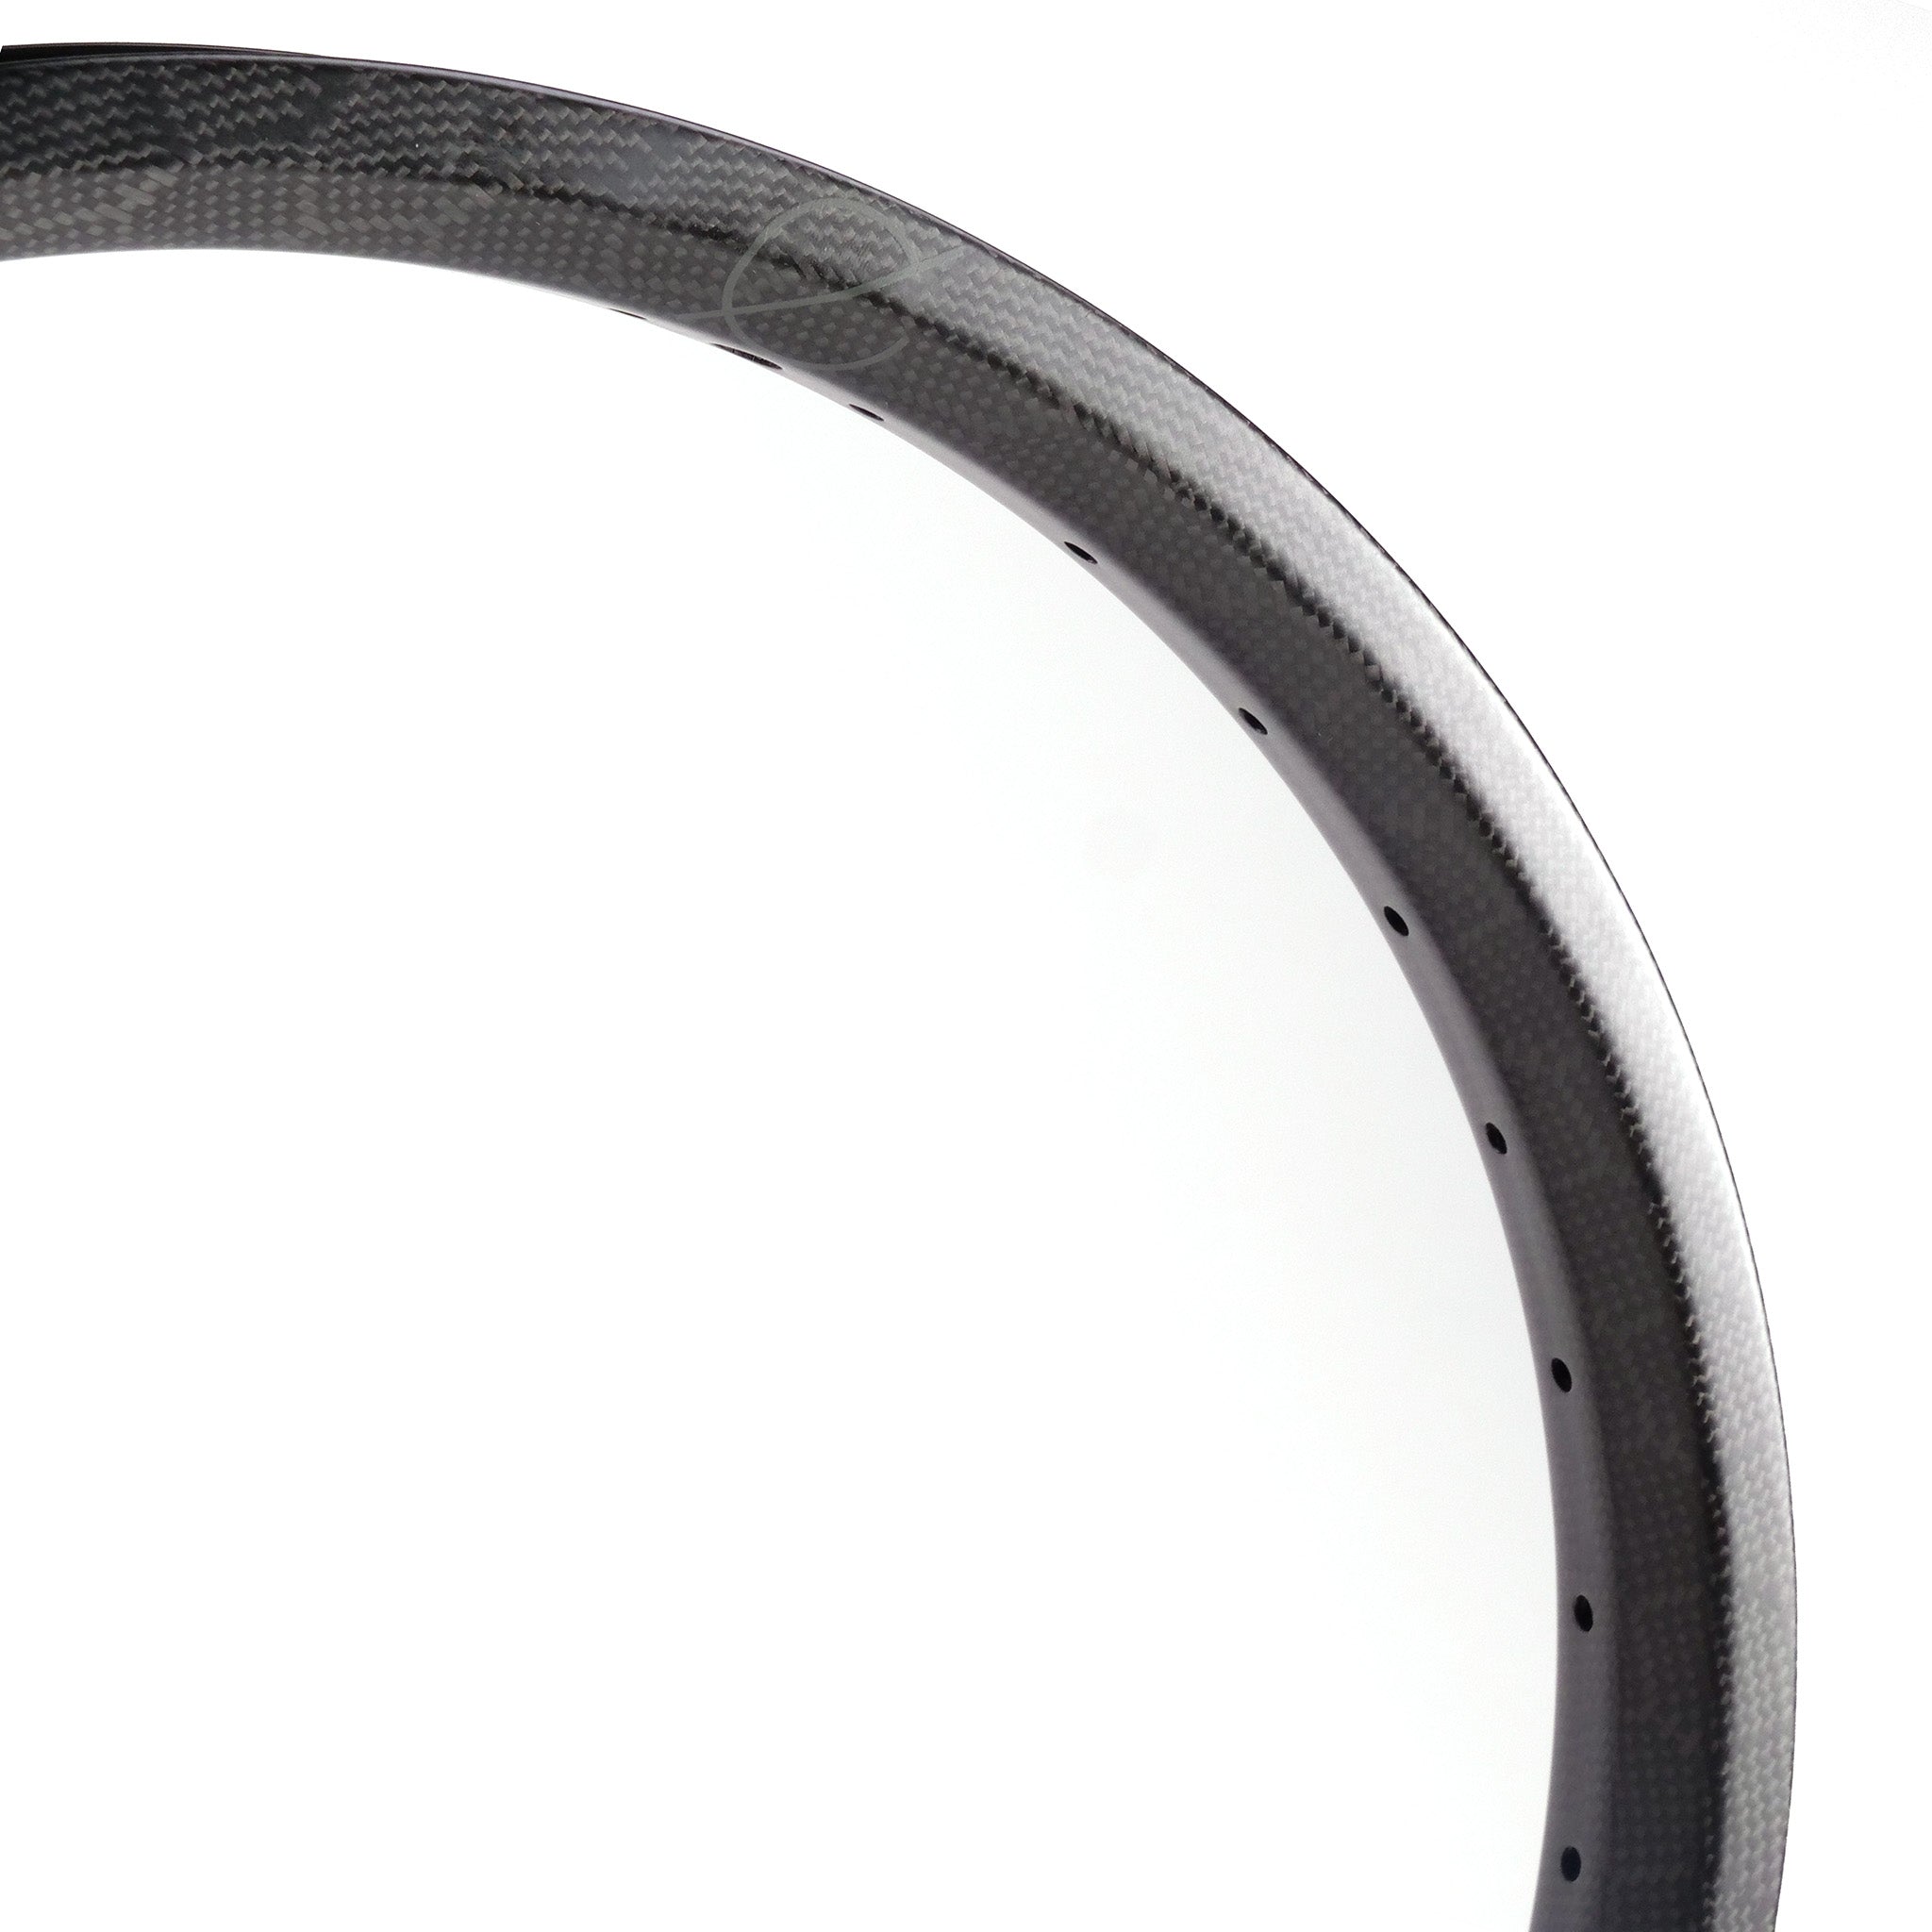 A close-up view of a Spectre NME Carbon Fibre 20 Inch Brakeless Rim with a matte finish, showing the perforations for spokes against a plain white background—a perfect choice for freestyle riders.